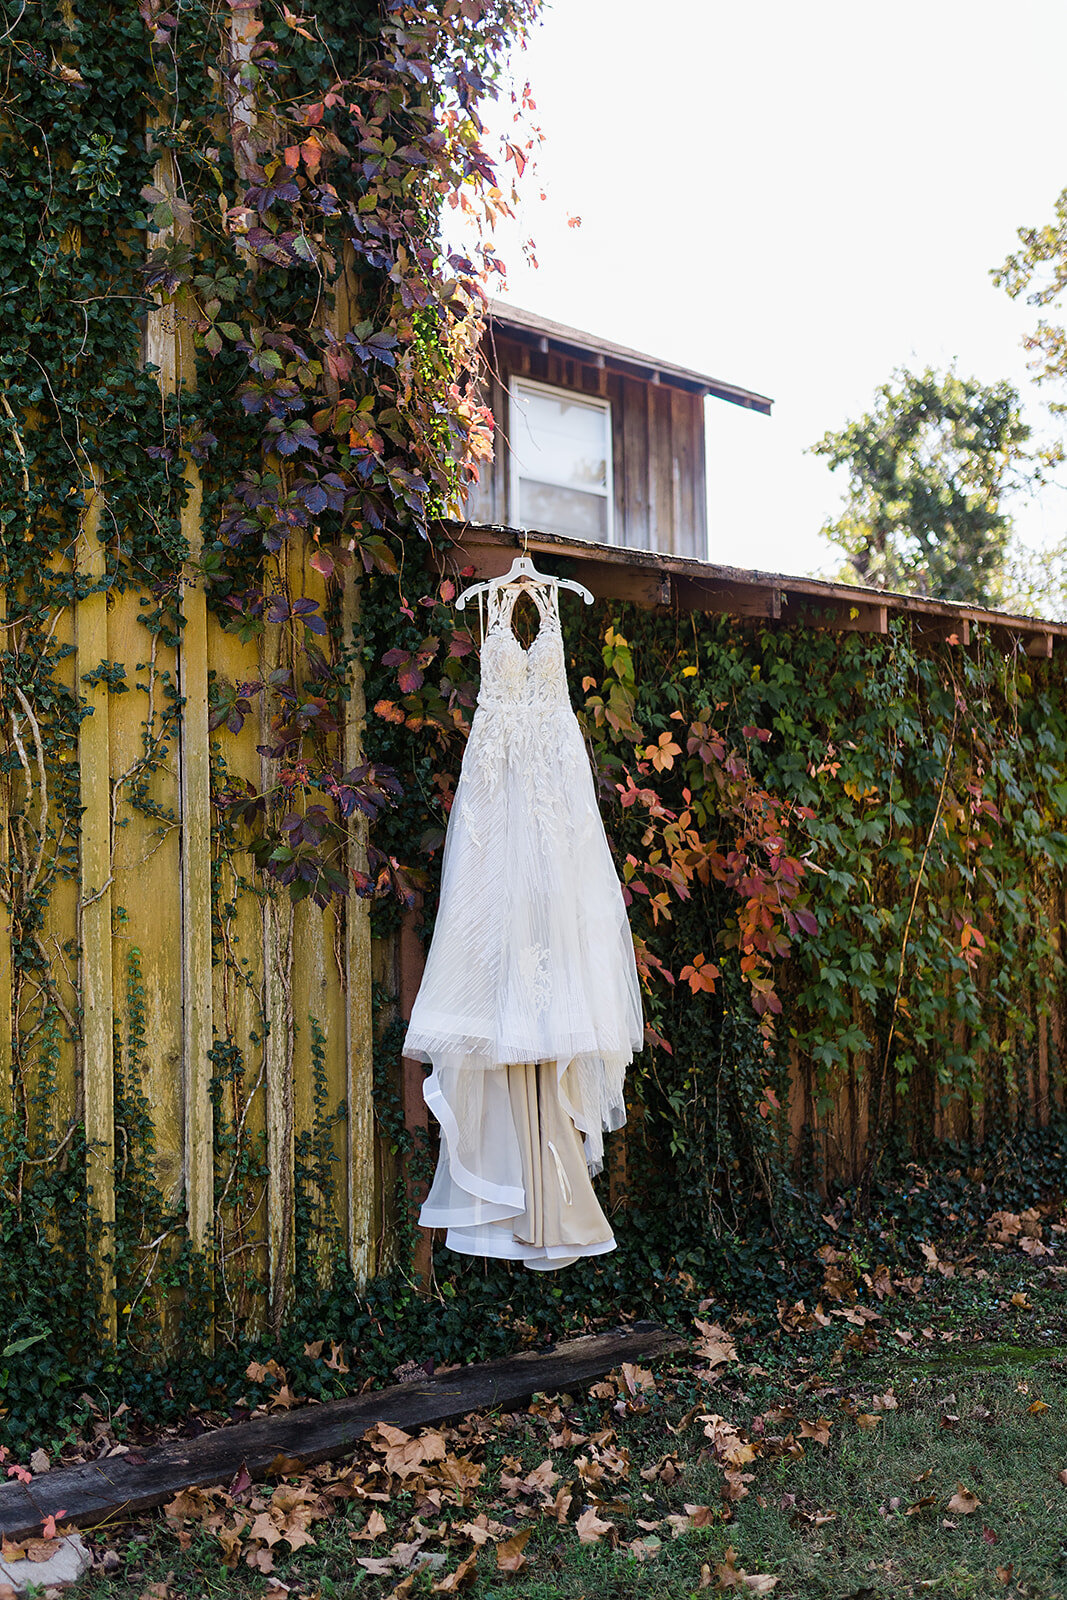 Wedding dress hanging in colorful vines